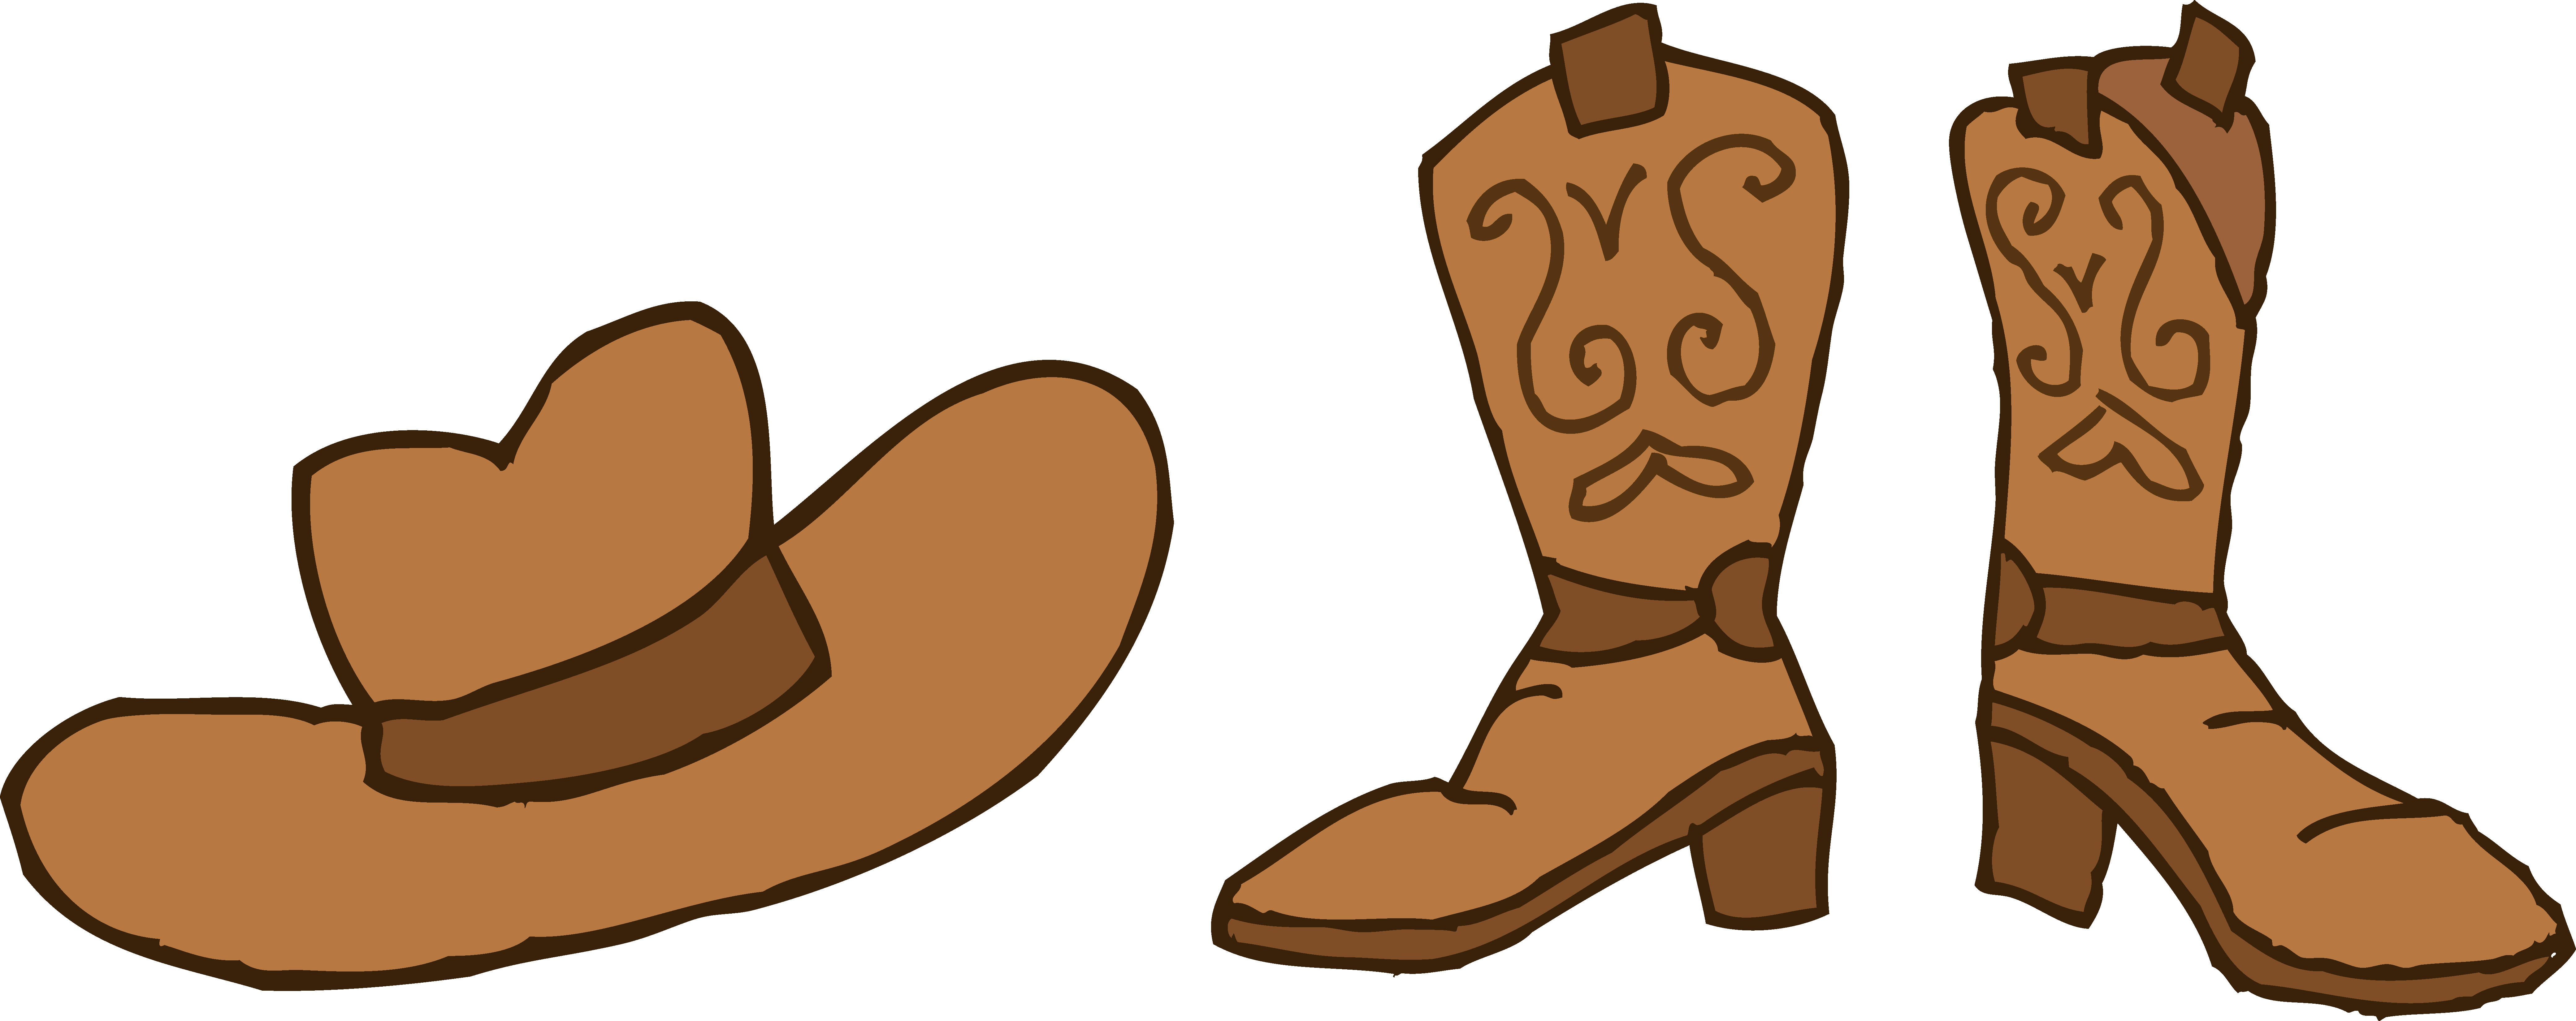 Cowboy Hat and Boots Clipart - Free Clip Art